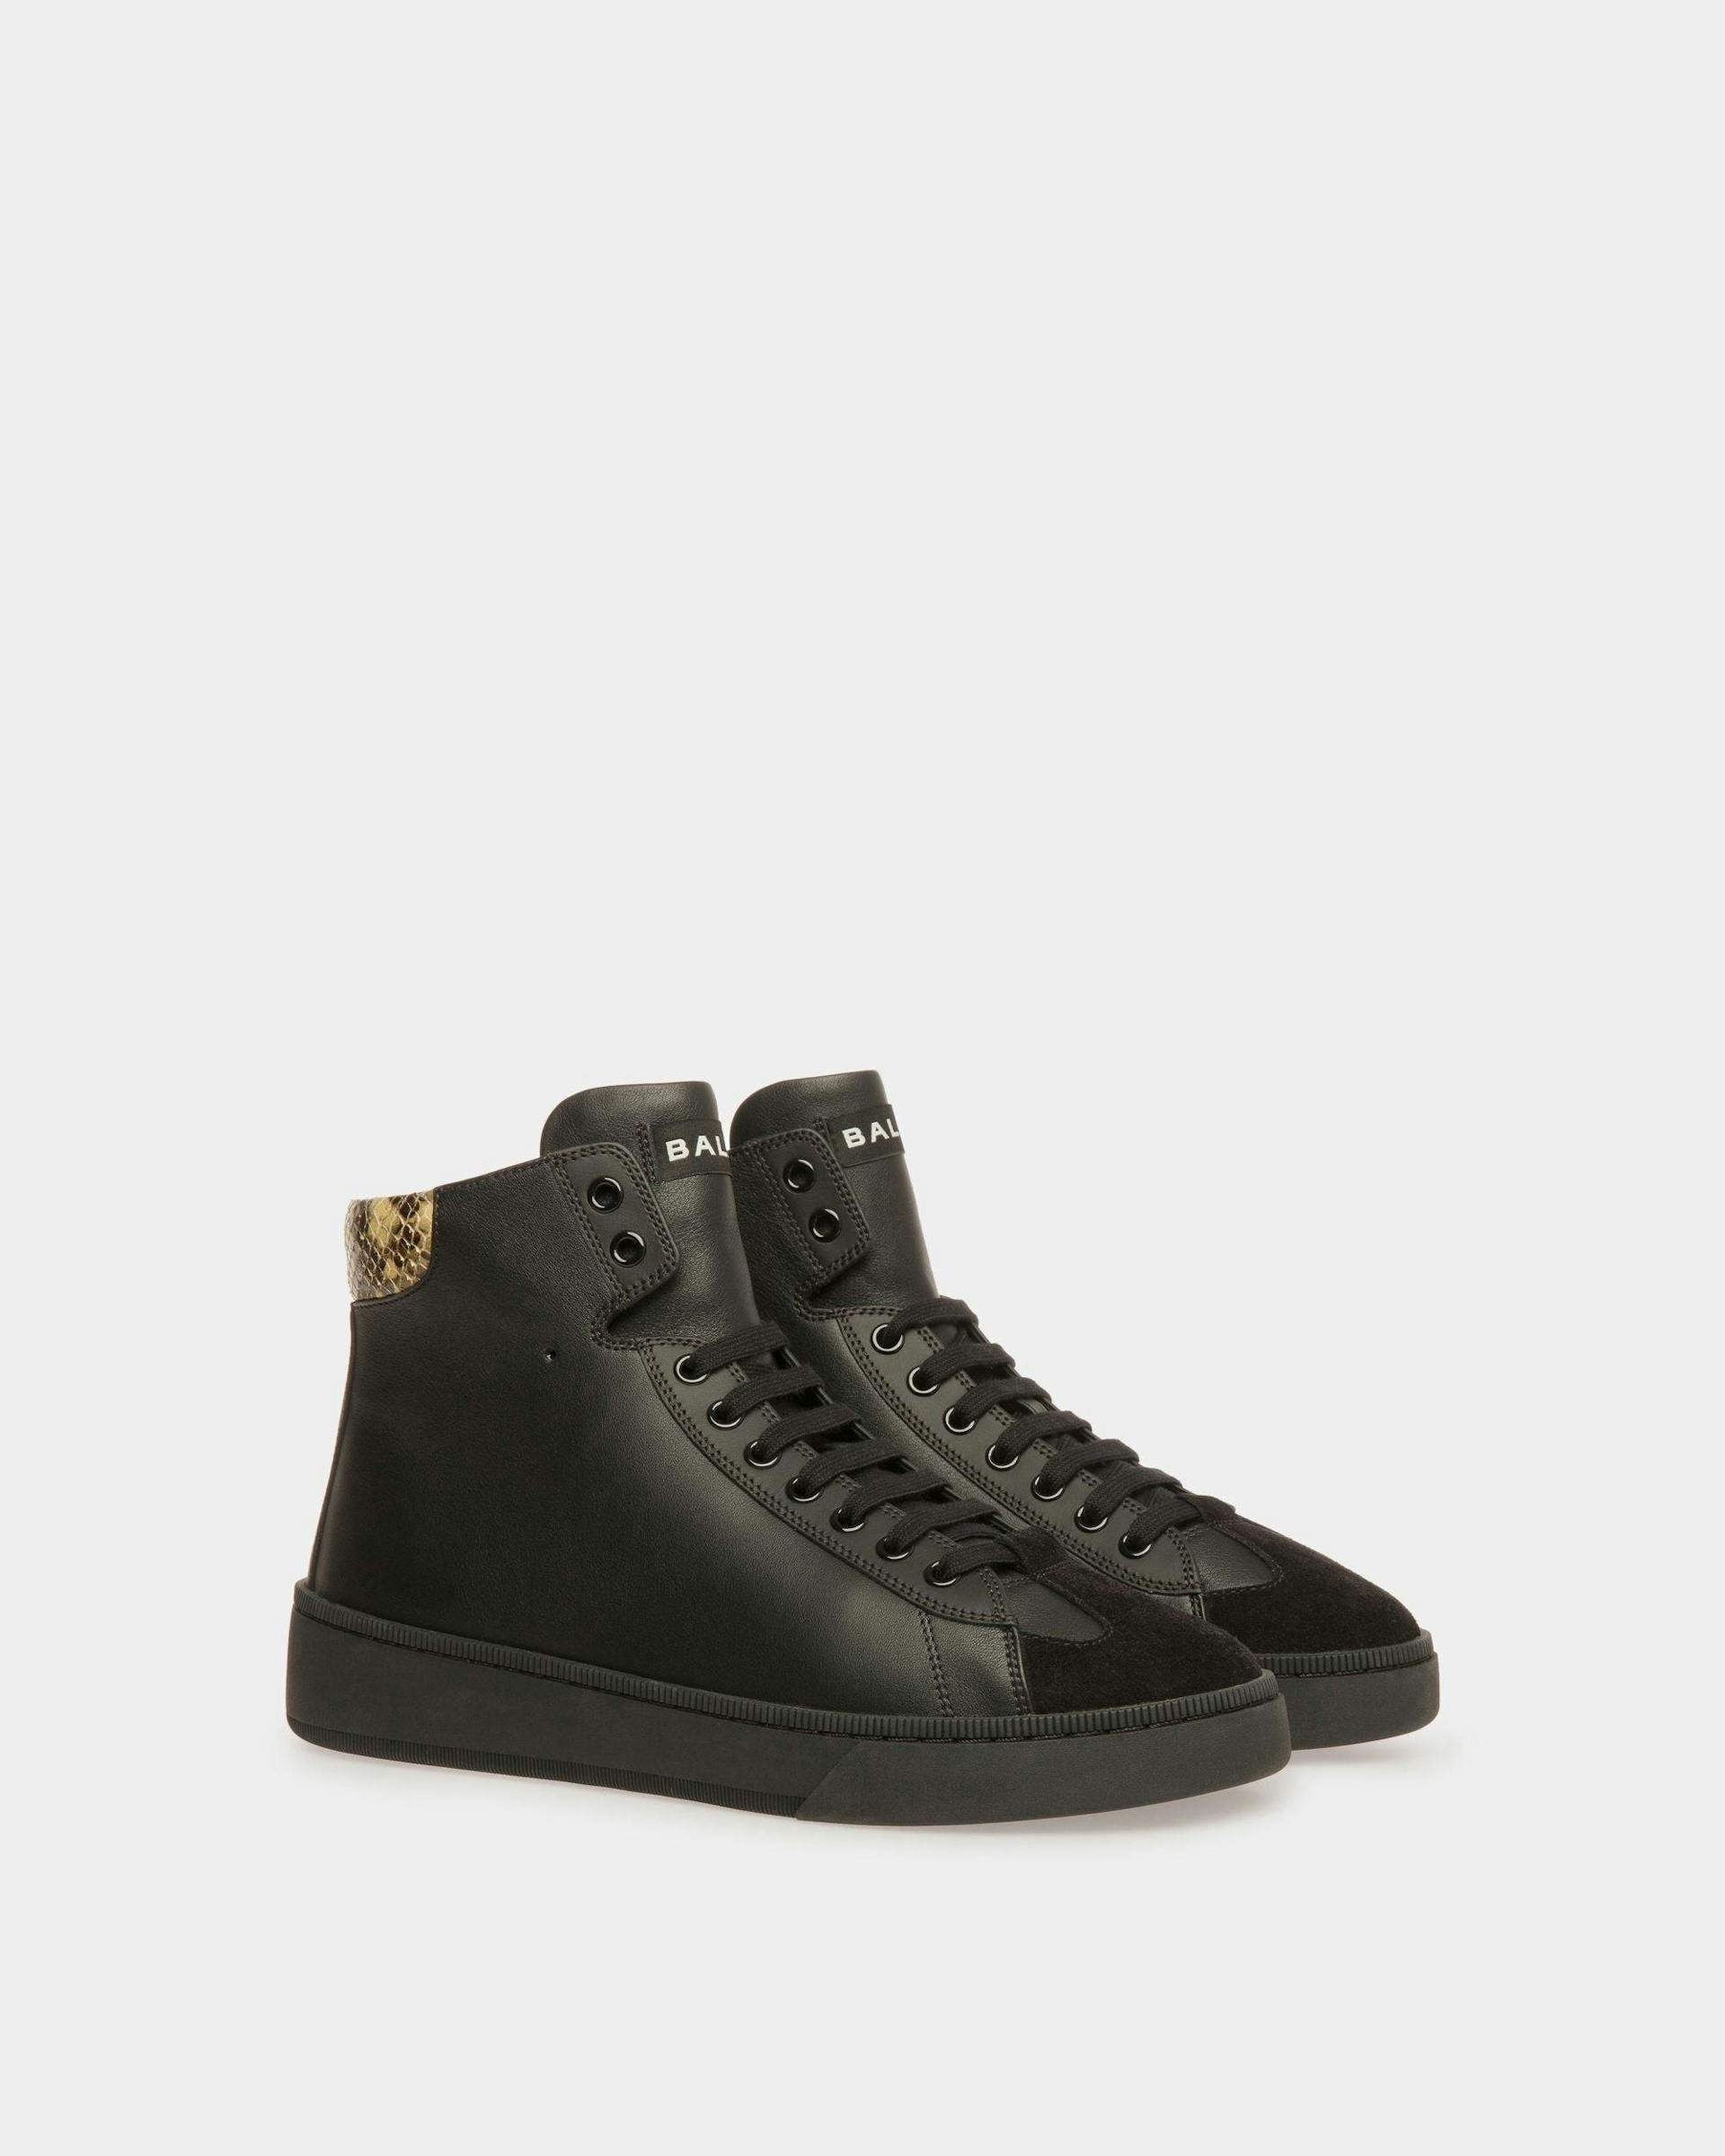 Raise Sneakers In Black And Python Print Leather - Men's - Bally - 03